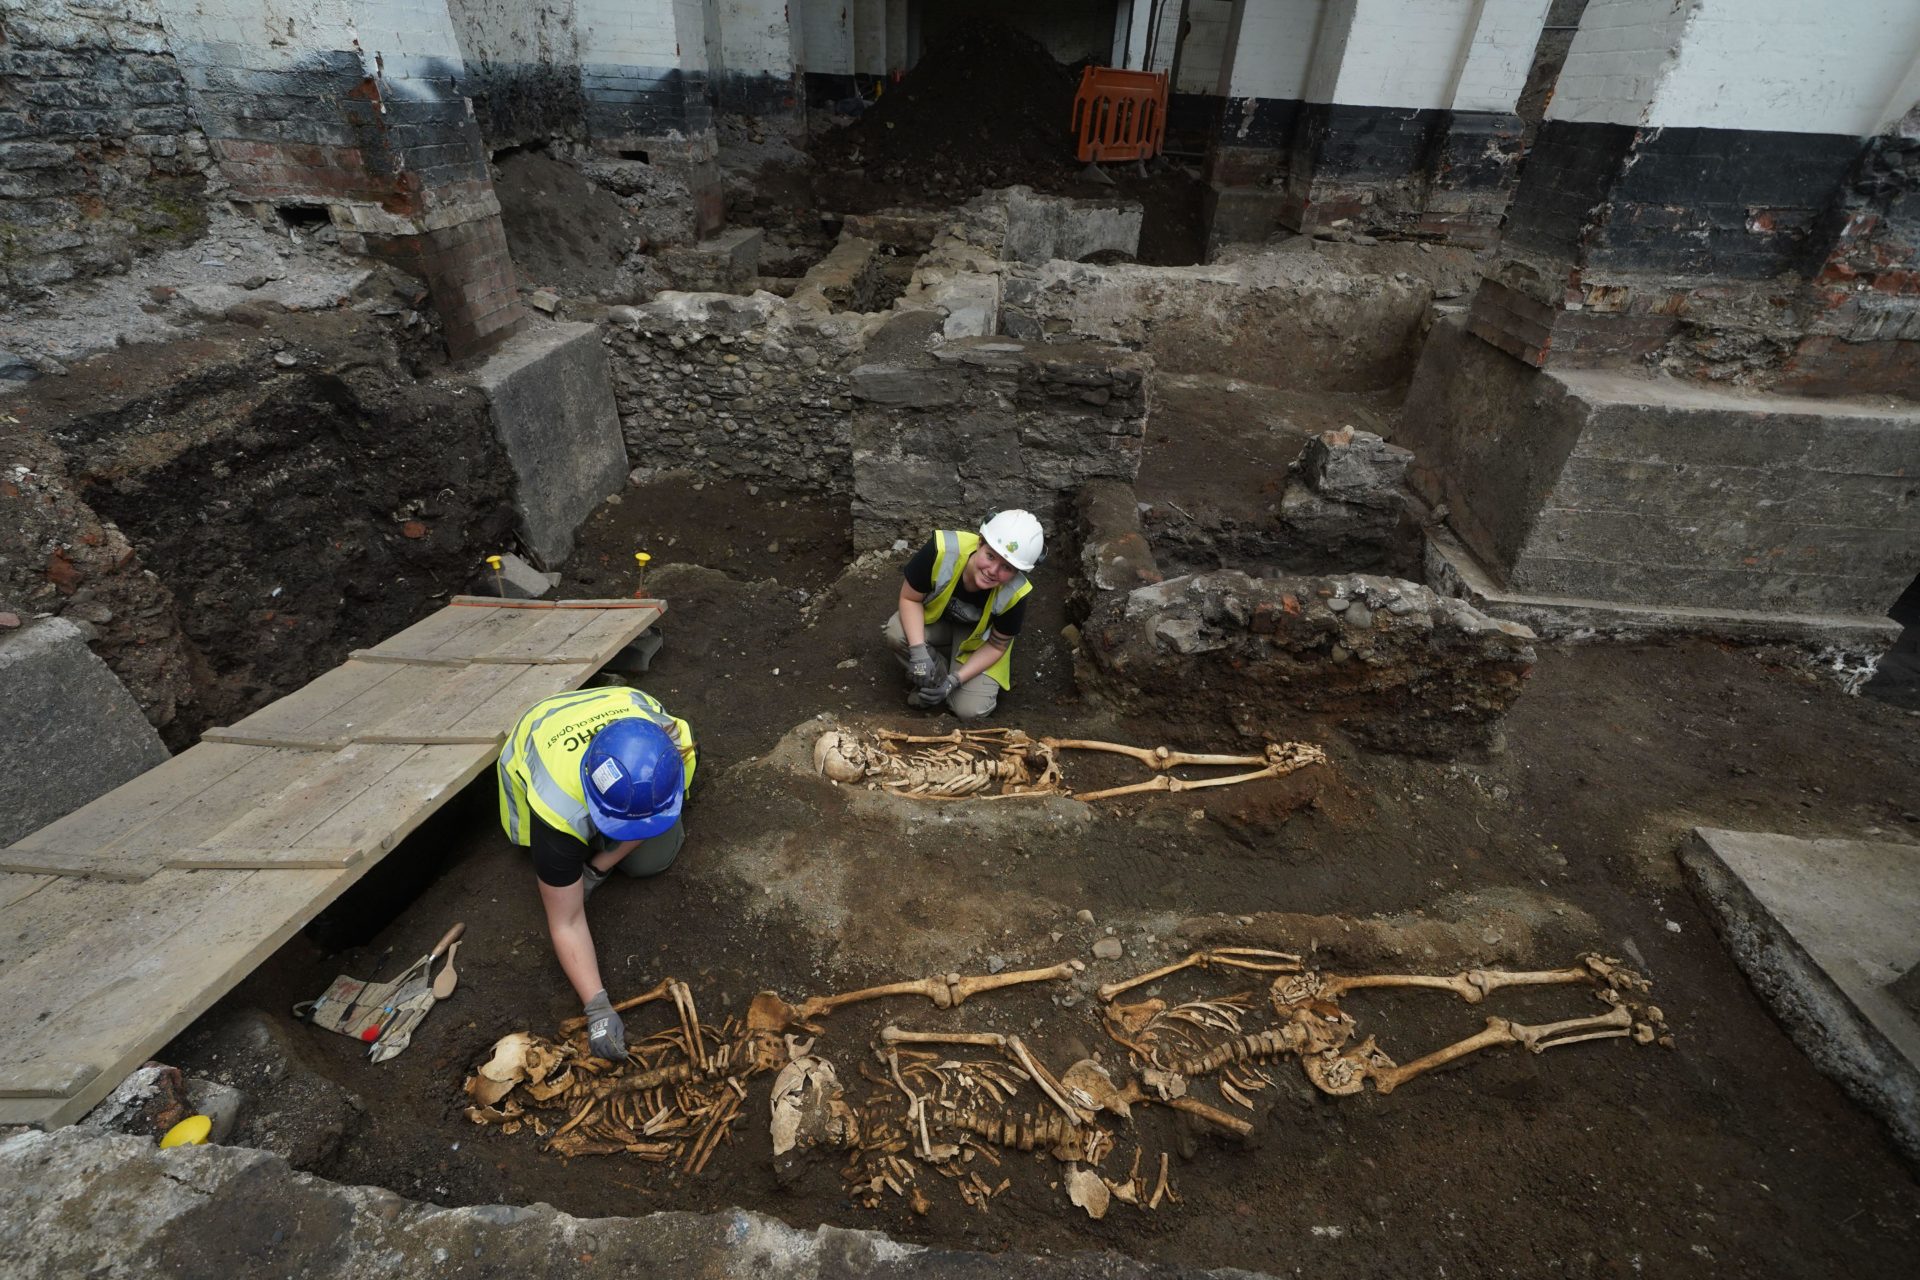 Members of the archaeology team works on a skeleton at an ancient burial site associated with the earliest inhabitants of medieval Dublin, which has been discovered along with foundations of buildings dating back to the 1600s, during preparatory works for